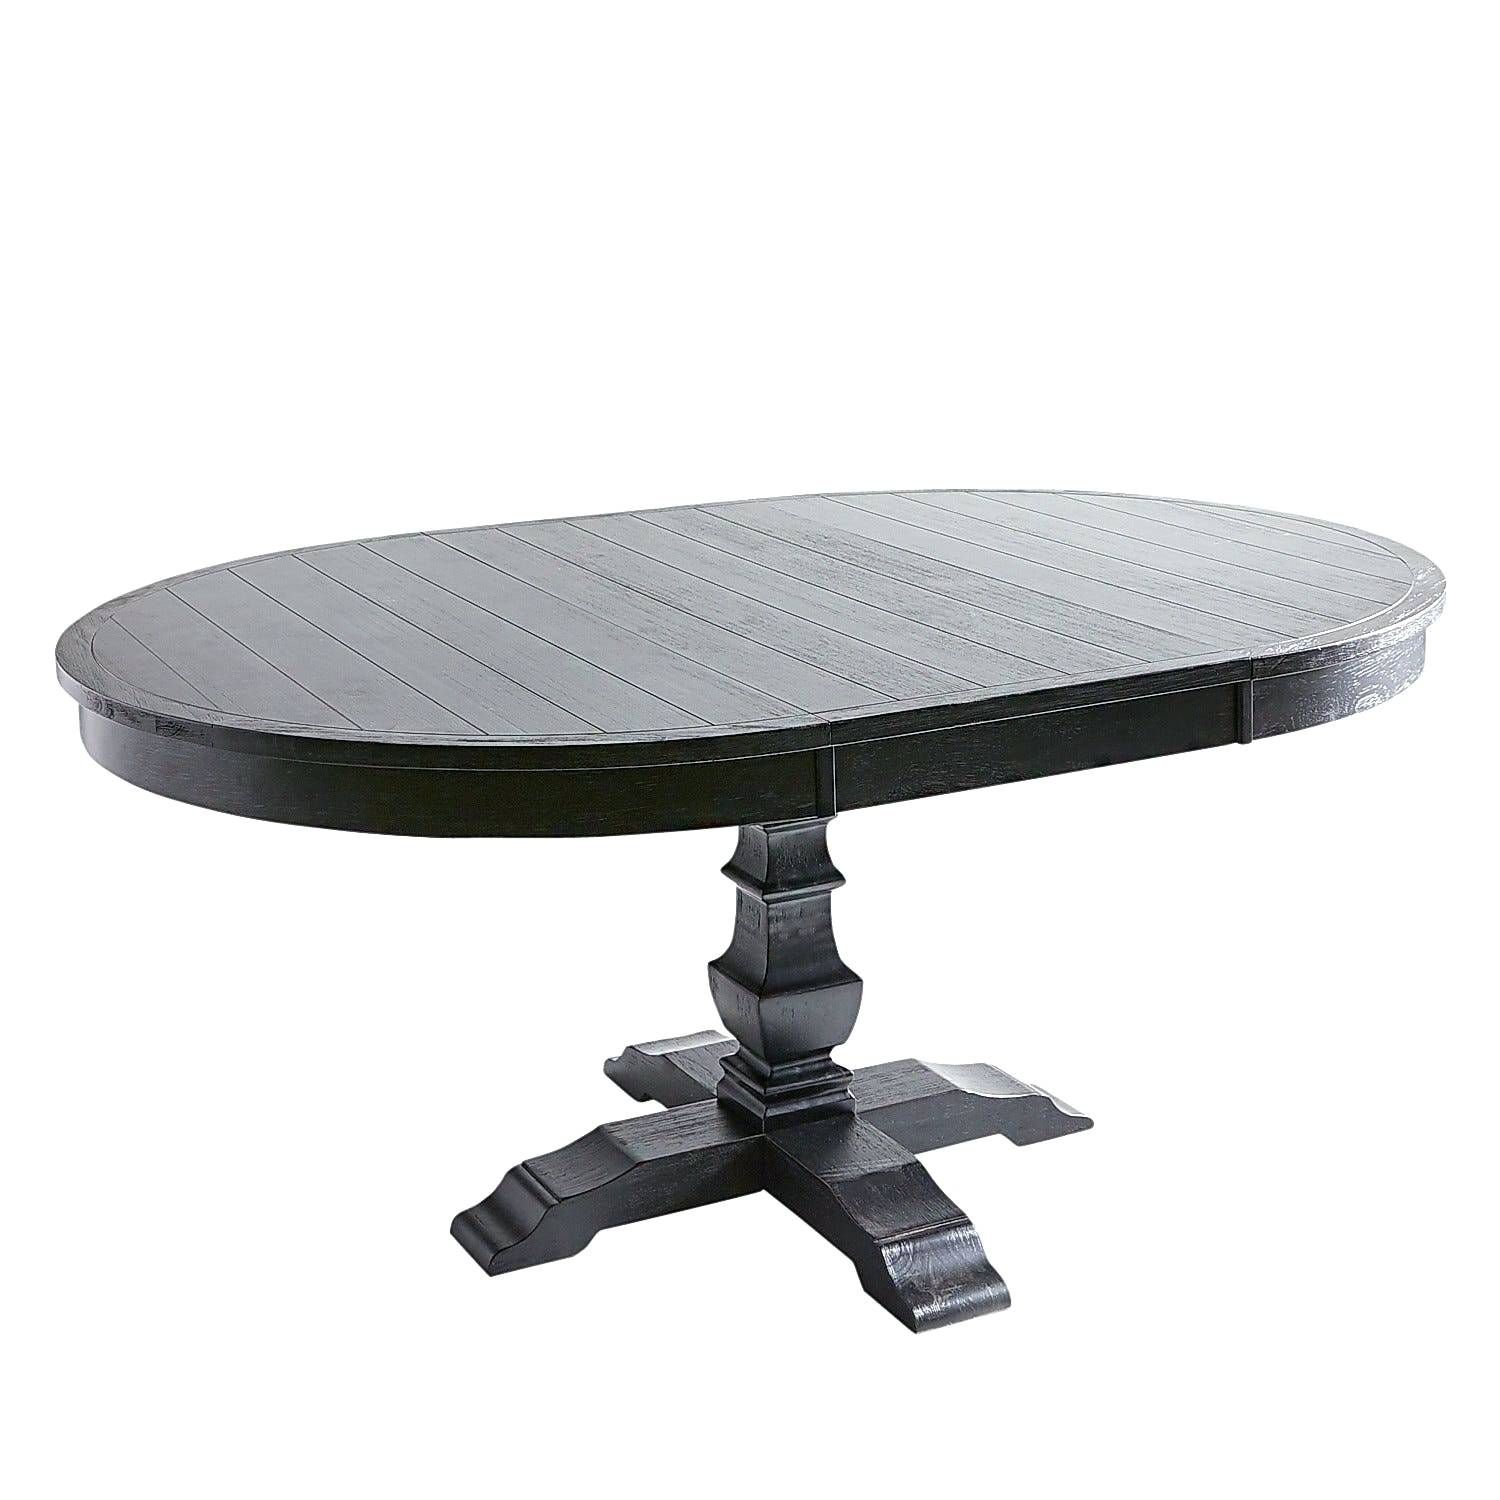 Round Dining Table Base Pier 1 – Jennyjohnson (View 22 of 25)